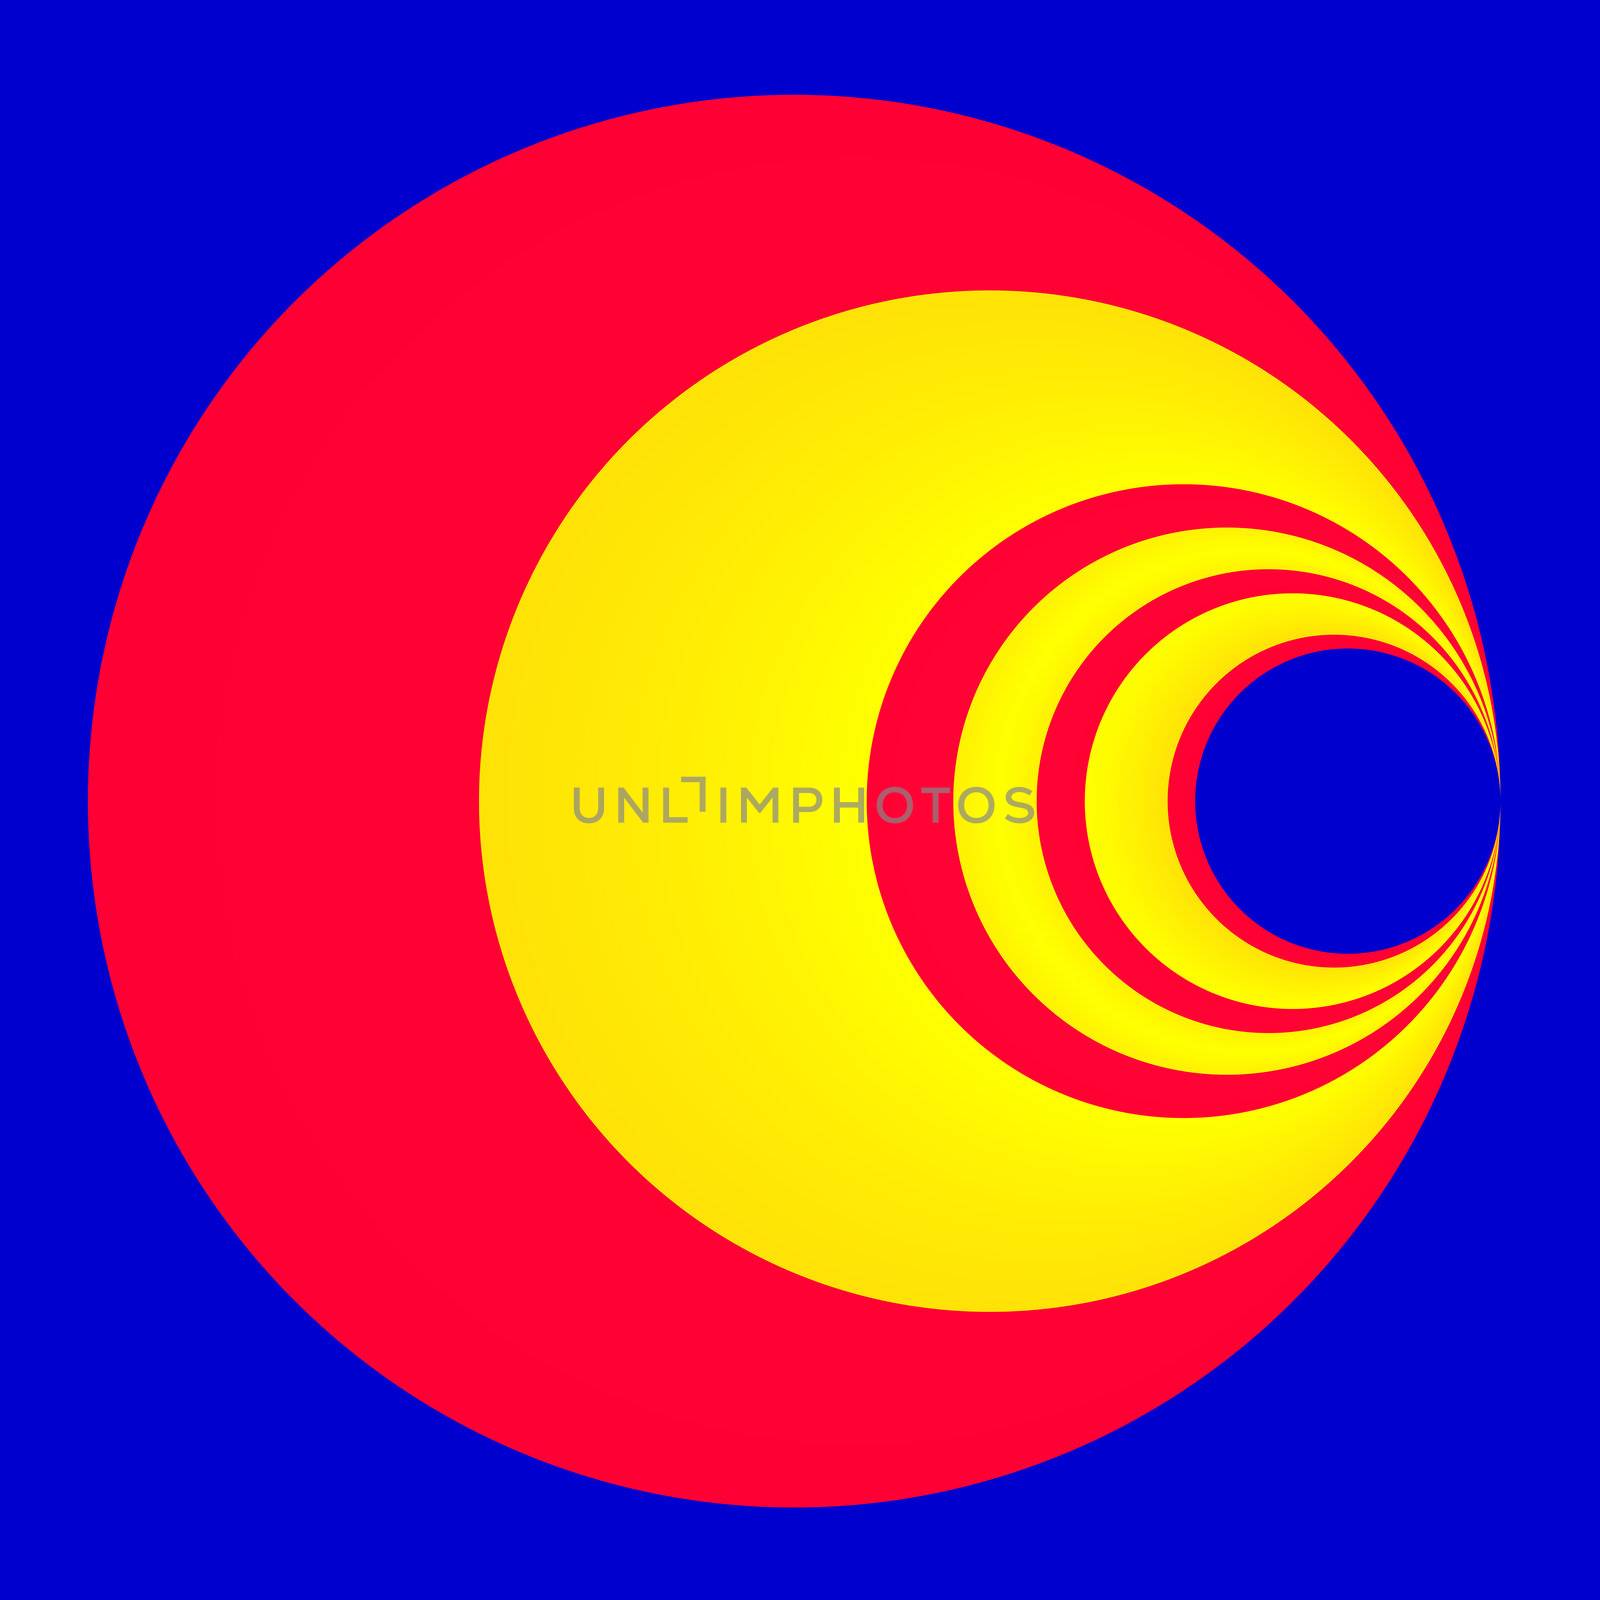 An abstract fractal of red and yellow circles on a blue background.